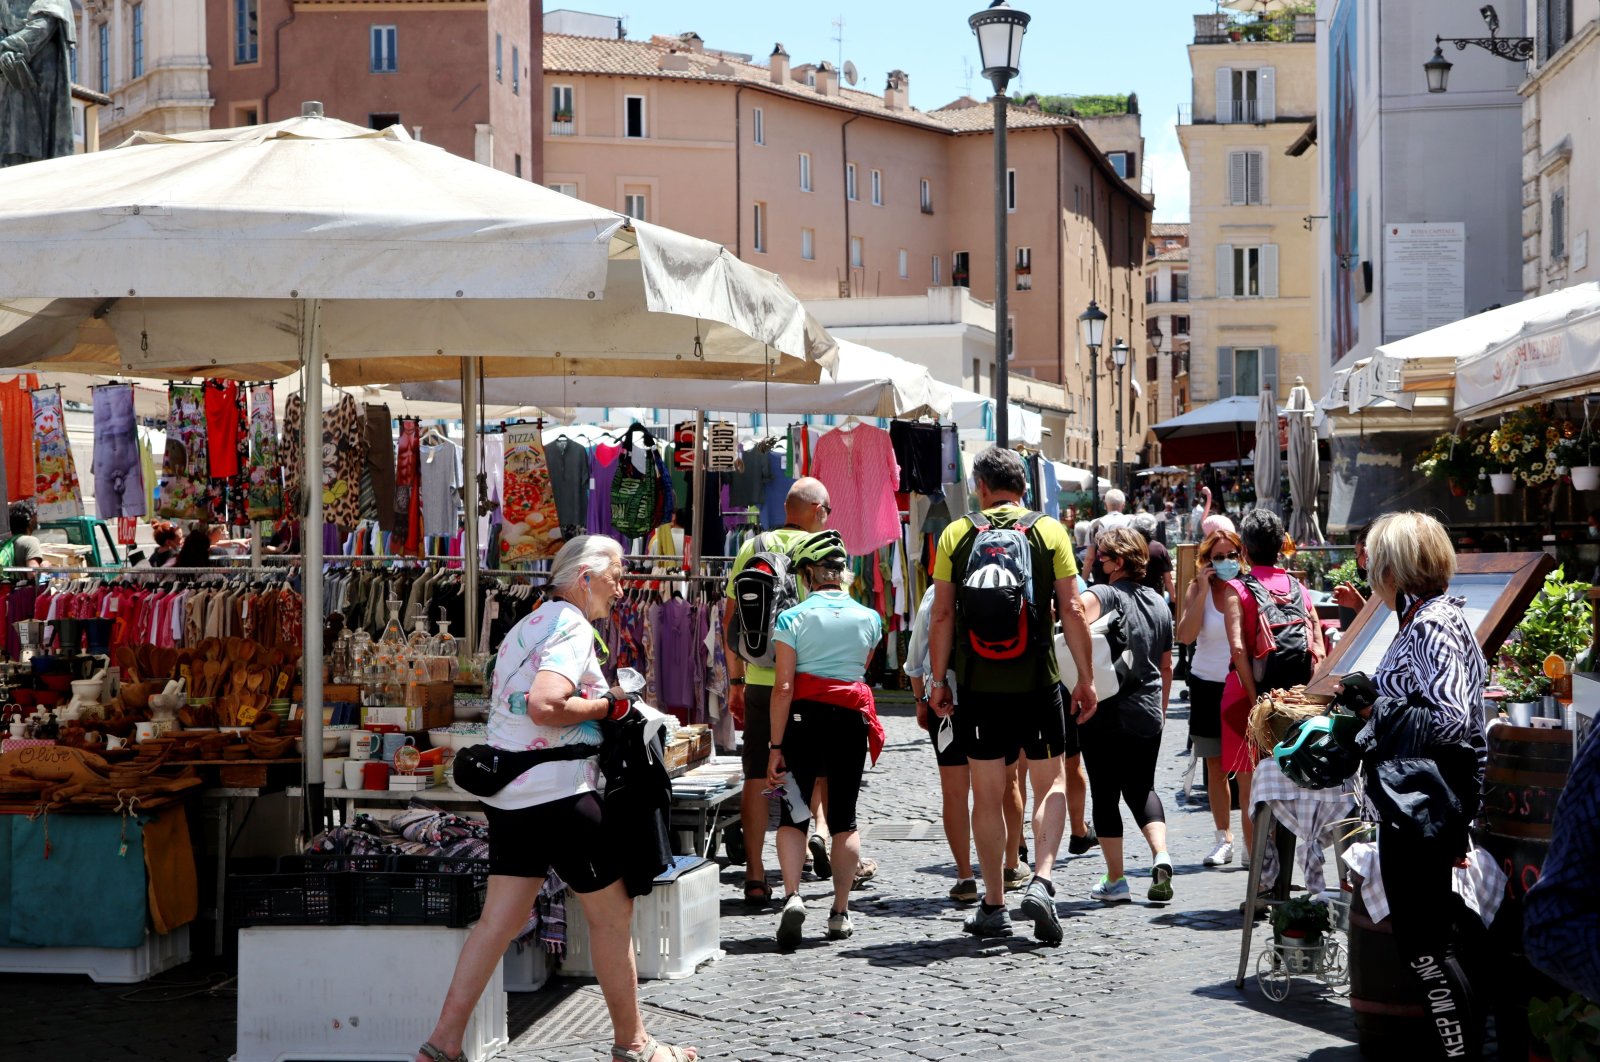 Tourists are seen at Campo de' Fiori traditional market, Rome, Italy, June 1, 2021. (Reuters Photo)